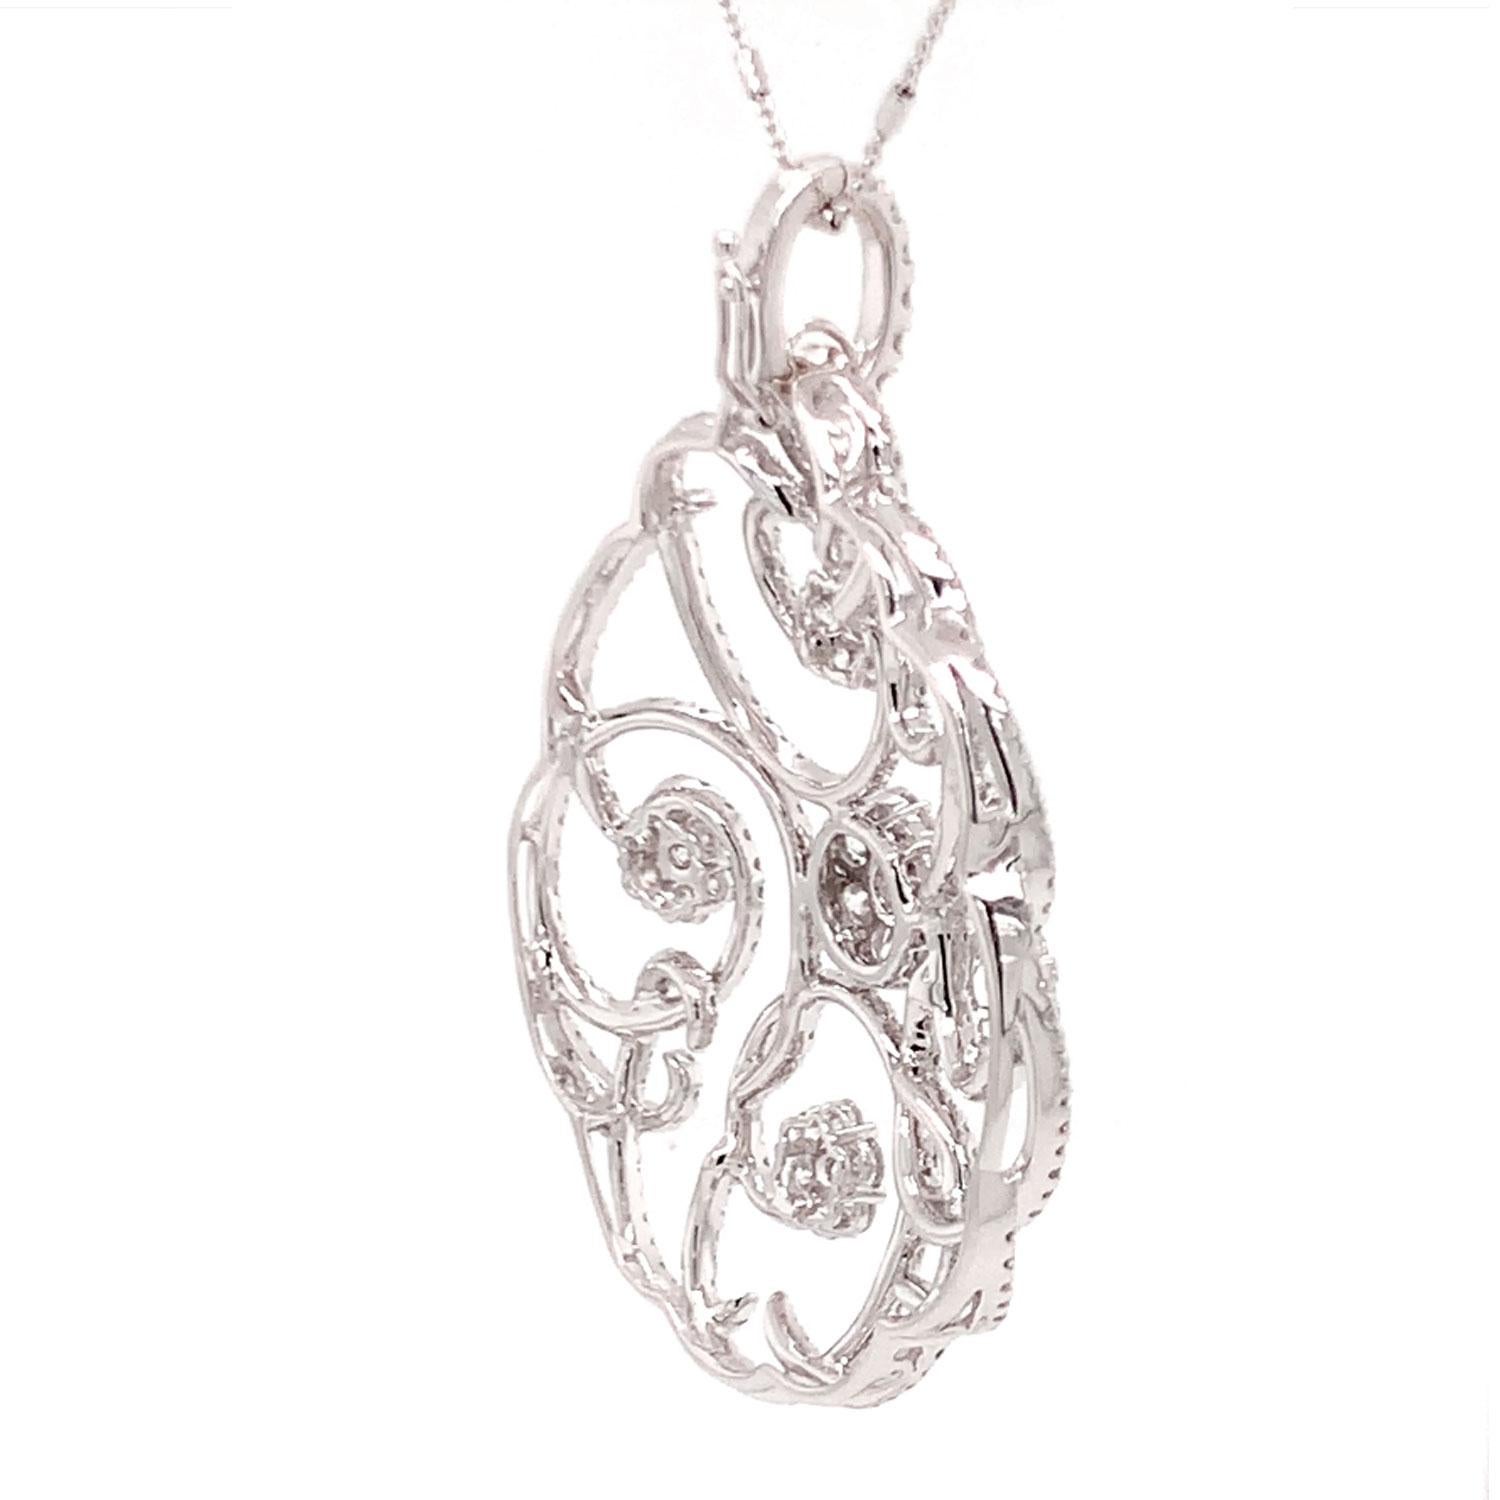 This stunning necklace/pendant features a 5.02 -Carat of brilliant round diamonds set in a nature-inspired floral design. The diamonds are F in Color and VS2-VS1 in Clarity. It measures 63 MM in length ( 2.4 Inches ) and 40 MM in width ( 1.6 inches)